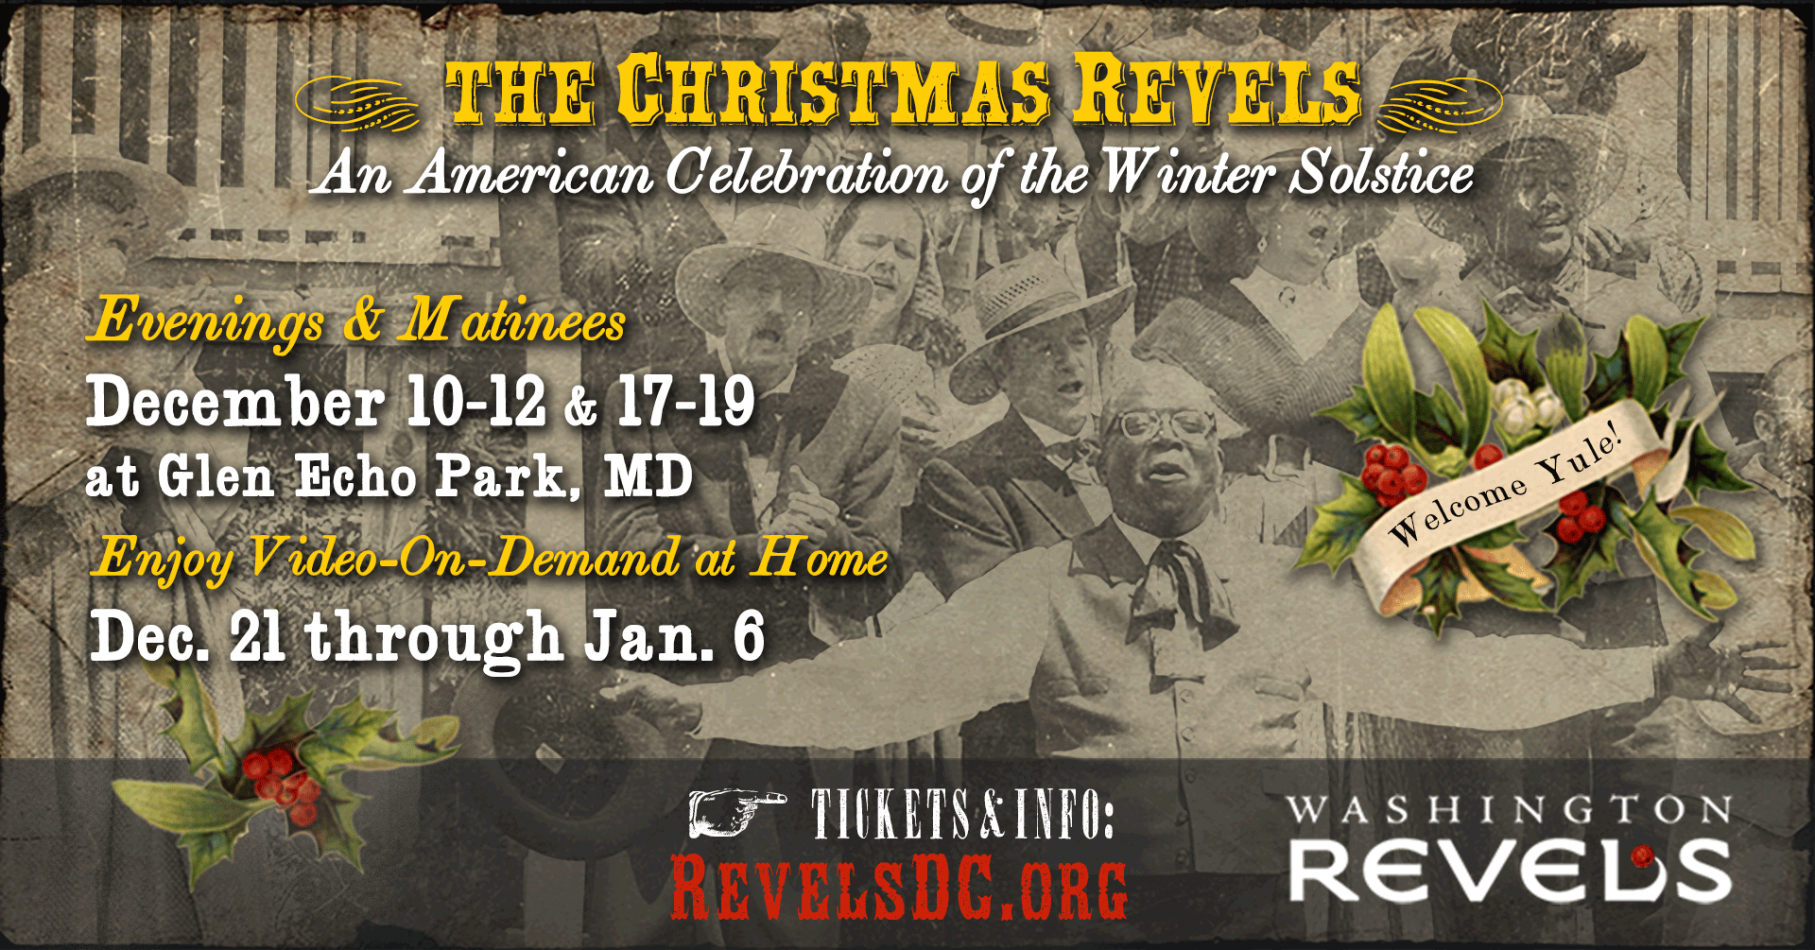 Gallery 5 - The Christmas Revels: An American Celebration of the Winter Solstice